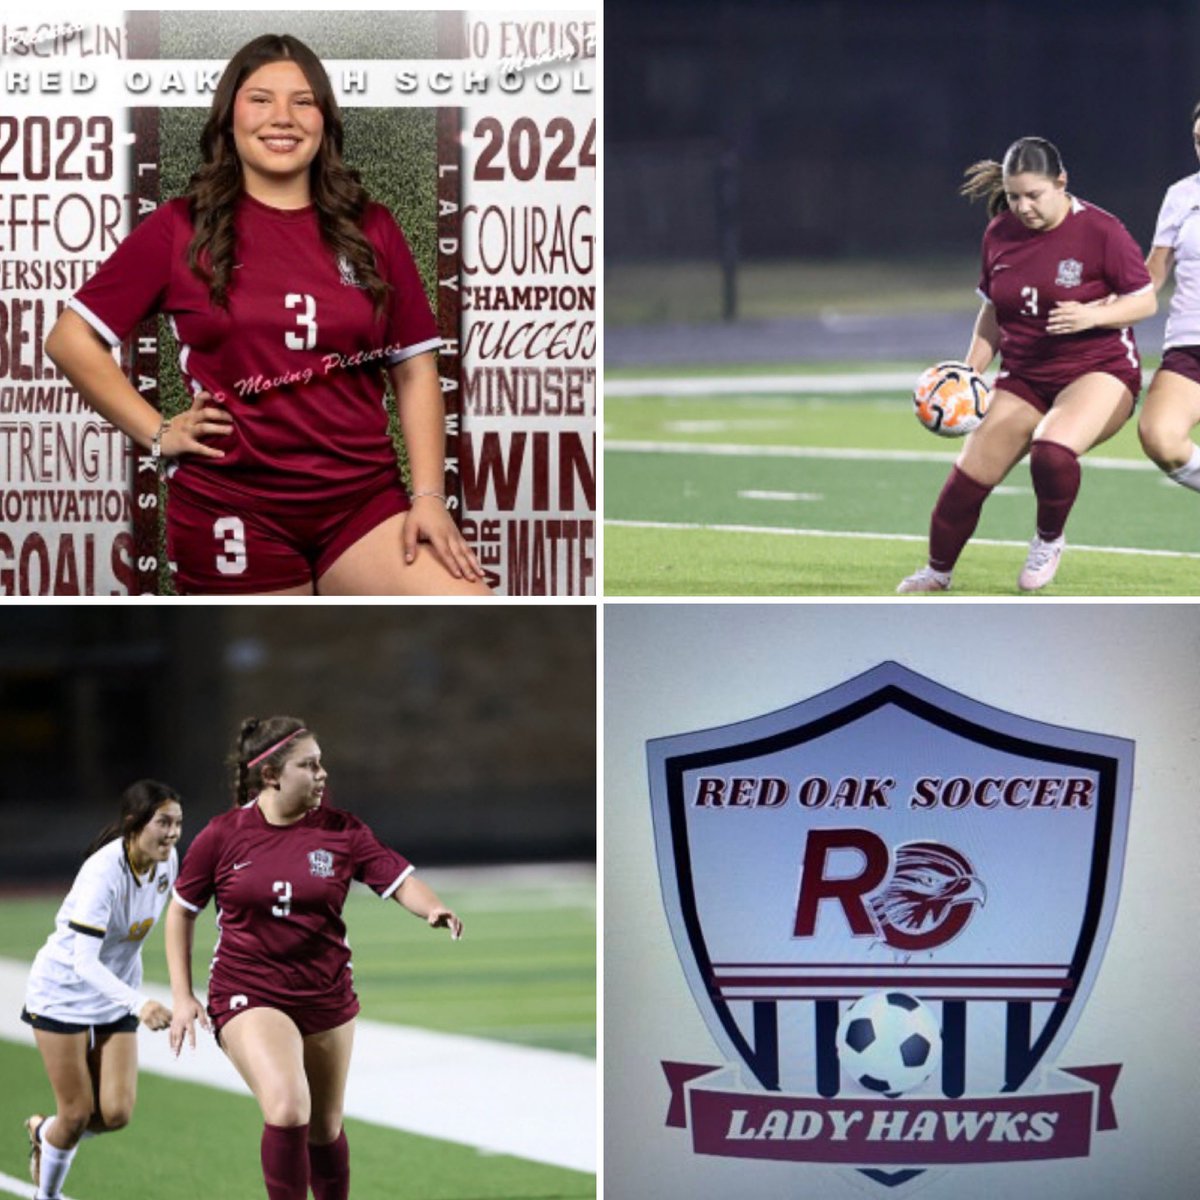 Congrats to #3 Elizabeth Perette for earning 1st team All district in 14-5A. Liz is a TRUE team player, playing keeper when needed or midfield when asked. She is well deserving and will do great things.@roisdathletics @SportsDayHS @eelizabeth_p @tascosoccer @EllisCoSports